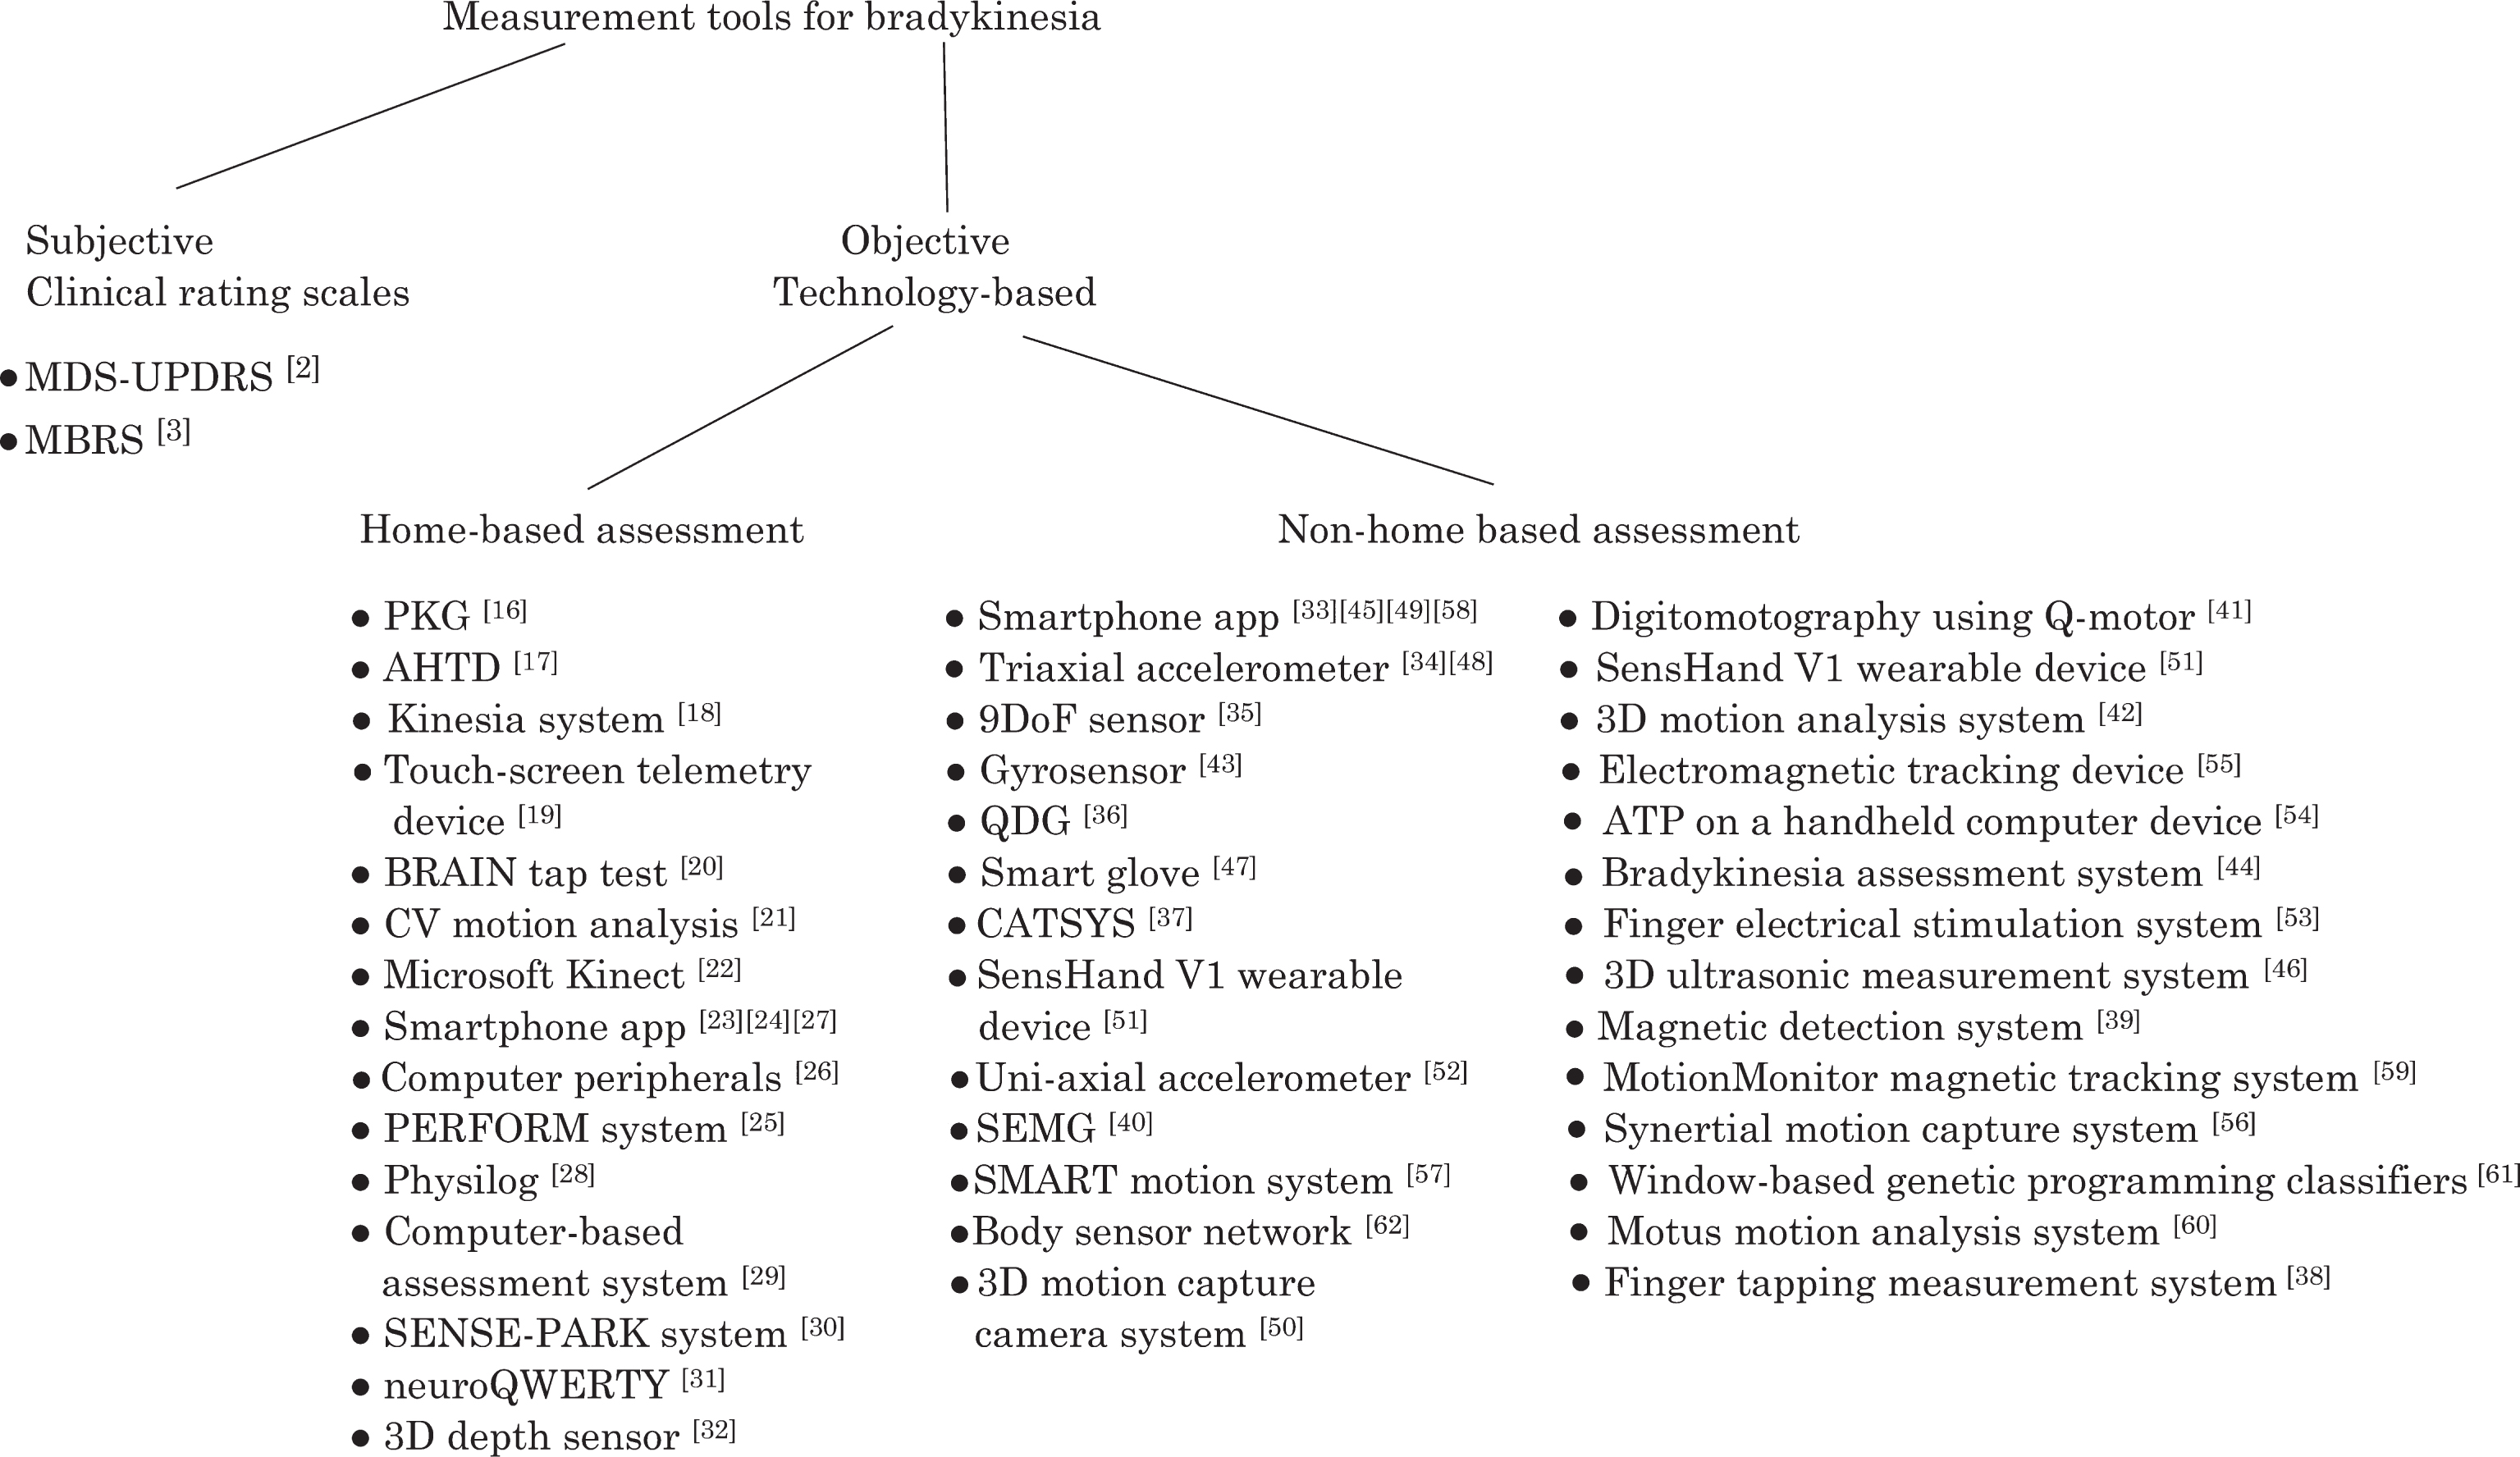 Summary diagram of measurement tools for 
limb bradykinesia [MDS-UPDRS – Movement Disorders Society Sponsored Revision of the Unified Parkinson’s 
Disease Rating Scale, MBRS – Modified Bradykinesia Rating Scale, PKG- Parkinson’s KinetiGraph, AHTD 
– At Home Testing Device, BRAIN tap test – BRadykinesia Akinesia INcoordination tap test, CV motion 
analysis – Computer Vision motion analysis, PERFORM – A sophisticated multipaRametric system FOR 
the continuous effective assessment and Monitoring of motor status in parkinson’s disease and other 
neurodegenerative diseases, 9DoF sensor – 9 Degrees of Freedom sensor, QDG – Quantitative 
Digitography, ATP – Alternating Tapping Performance, CATSYS – Co-ordination Ability Testing System, SEMG- Surface electromyography].